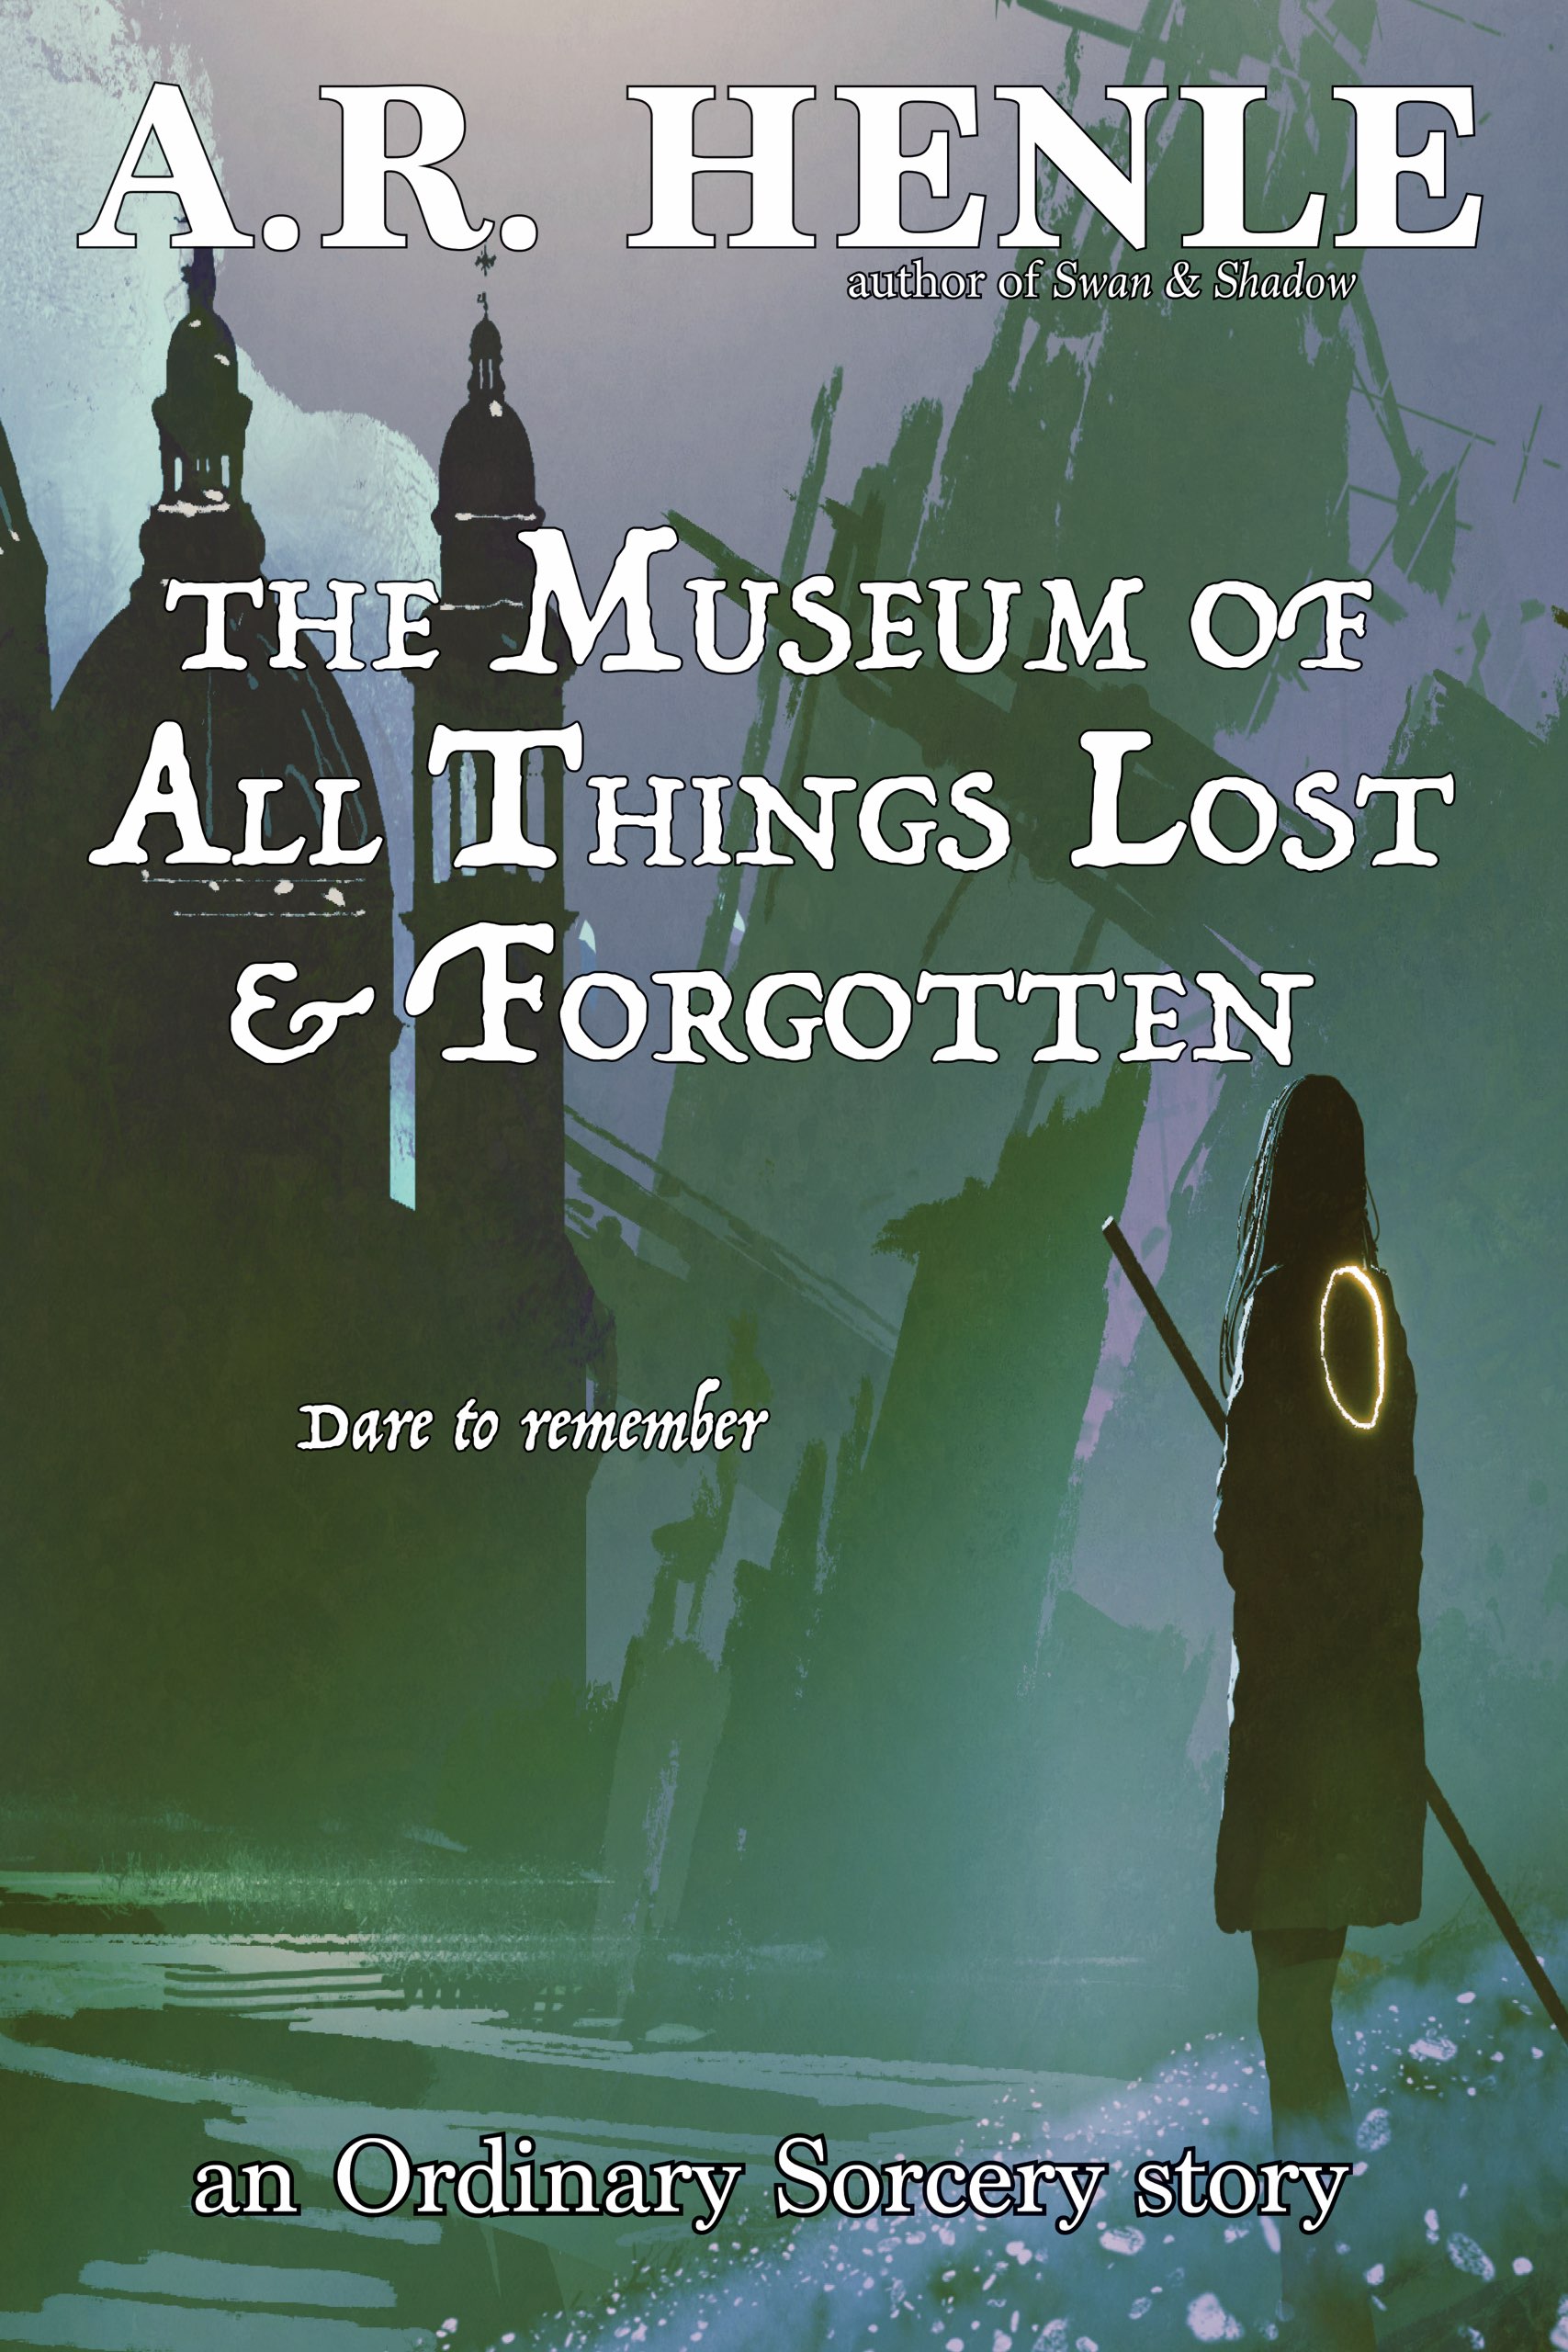 Cover for The Museum of All Things Lost & Forgotten. A woman carrying a staff heads toward lost buildings